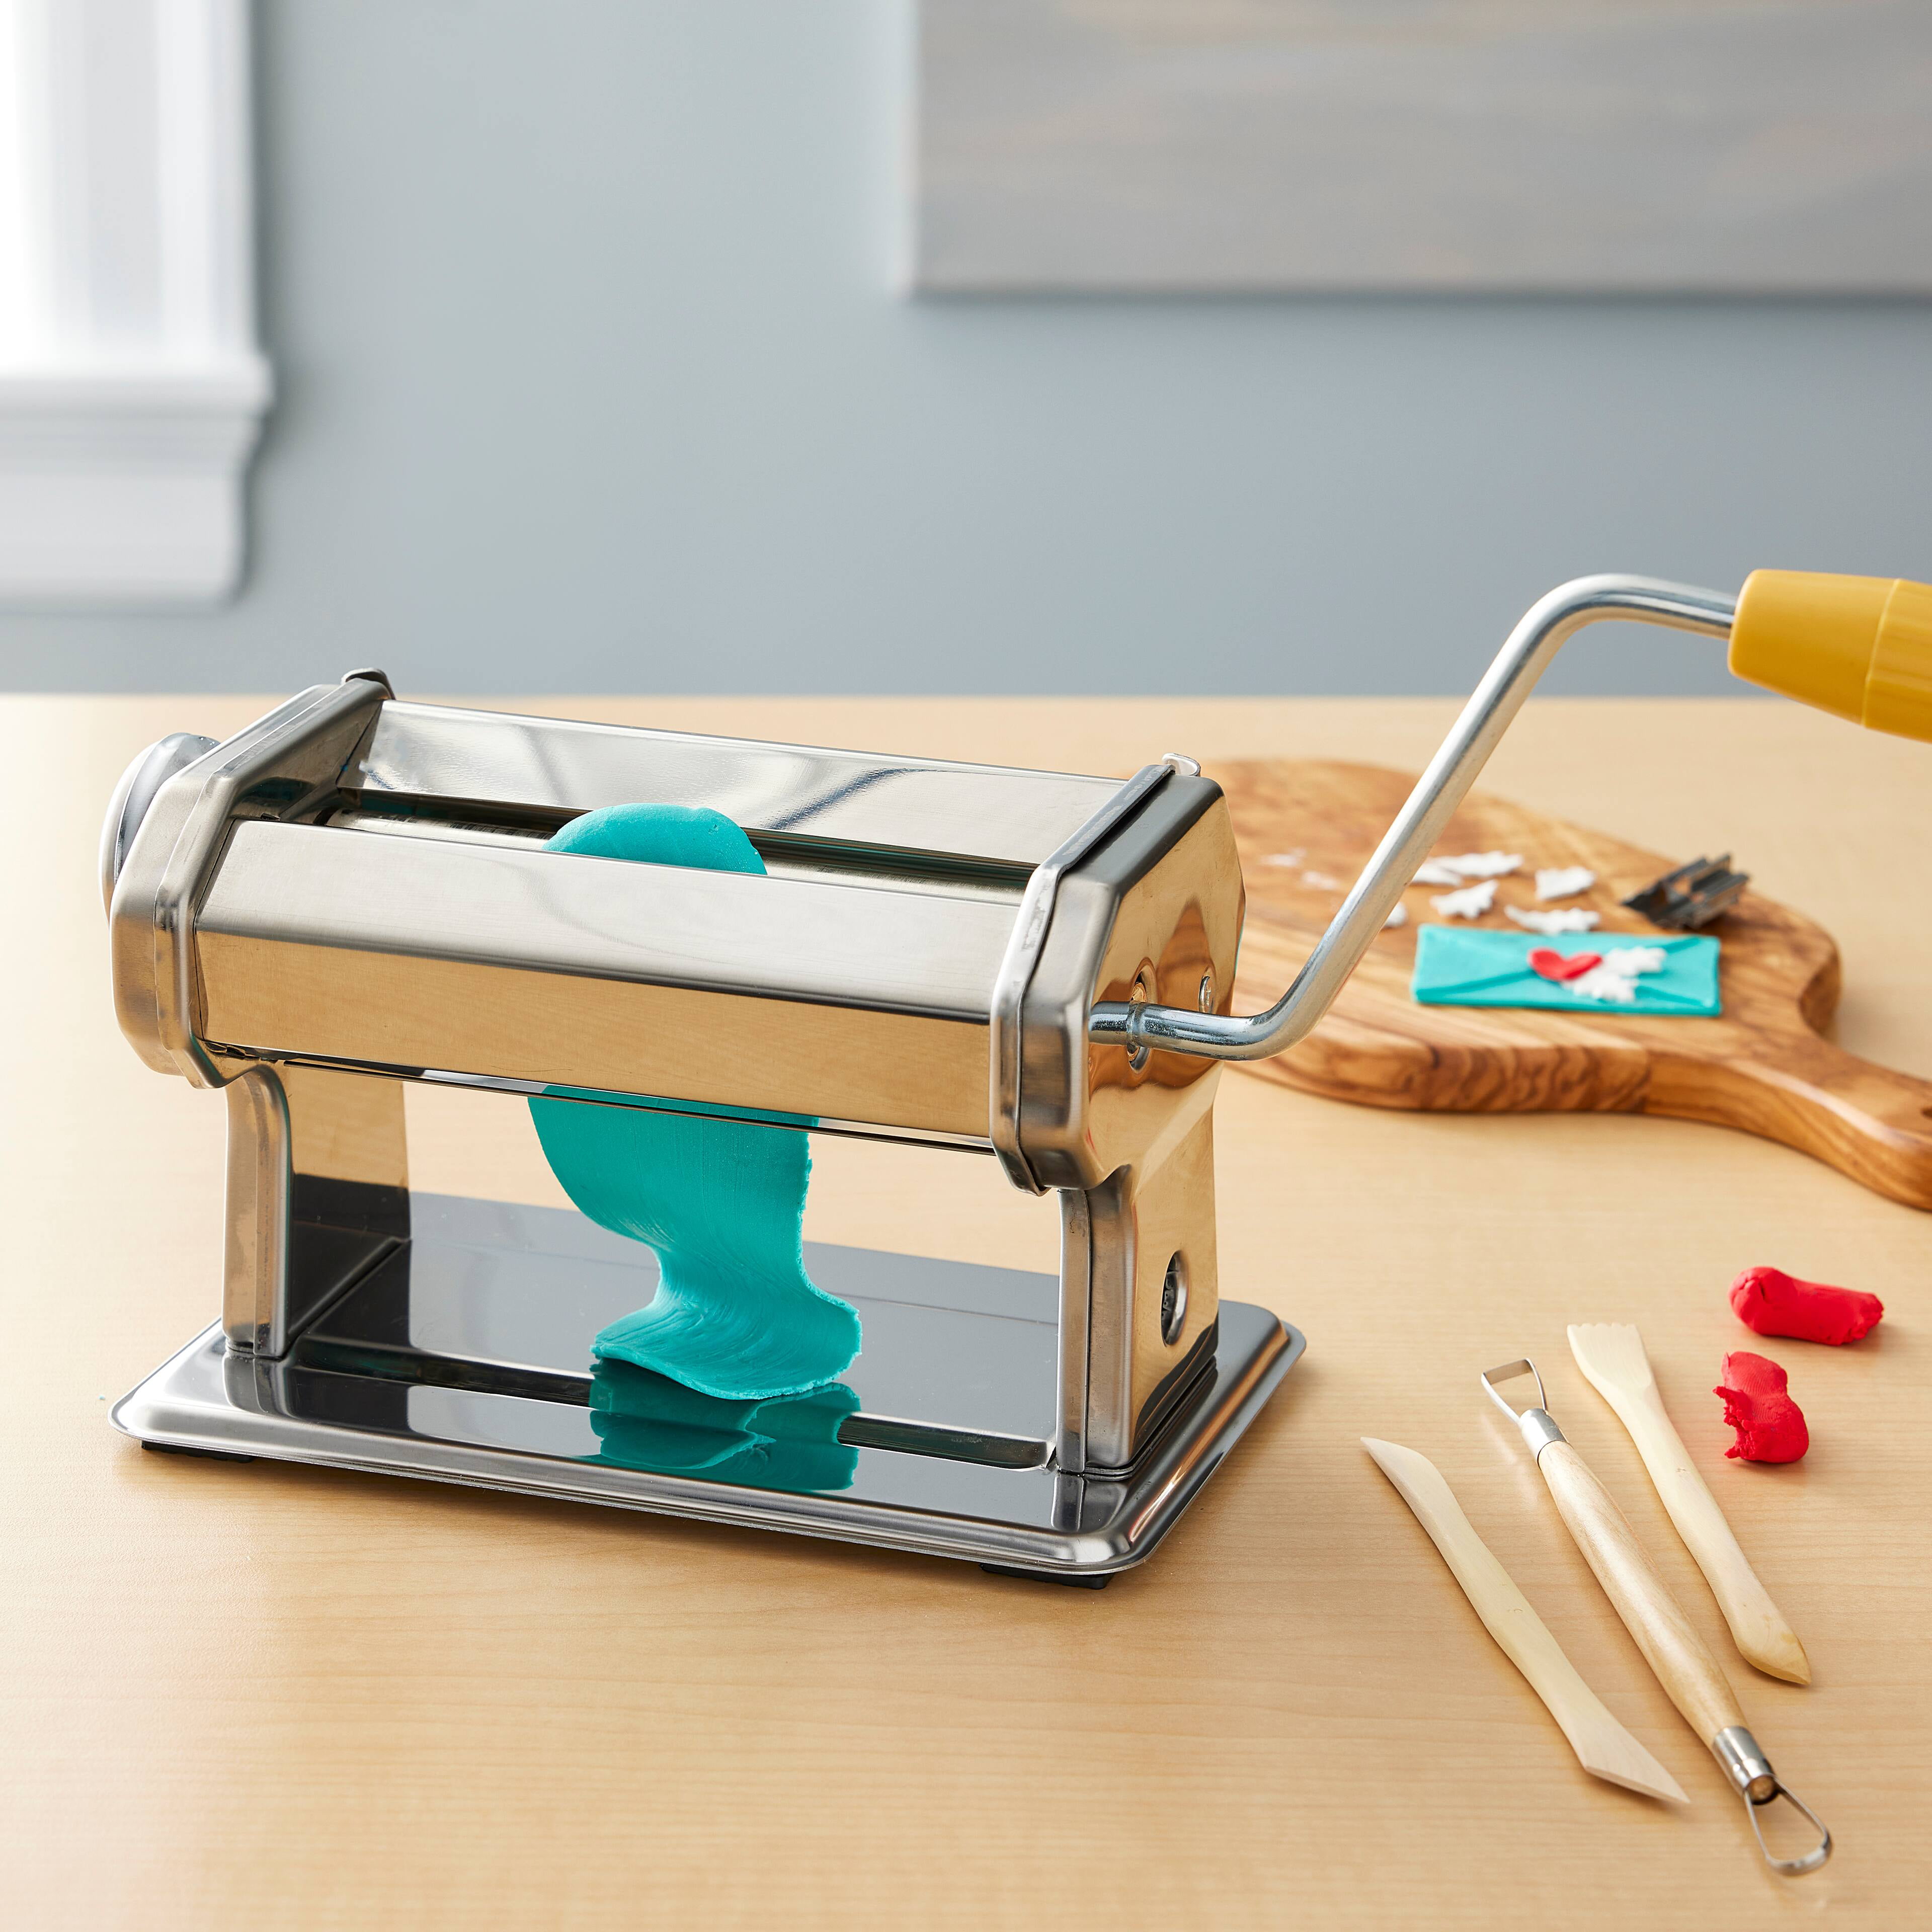 Atlas Pasta Machines for Polymer Clay - A Review - The Blue Bottle Tree